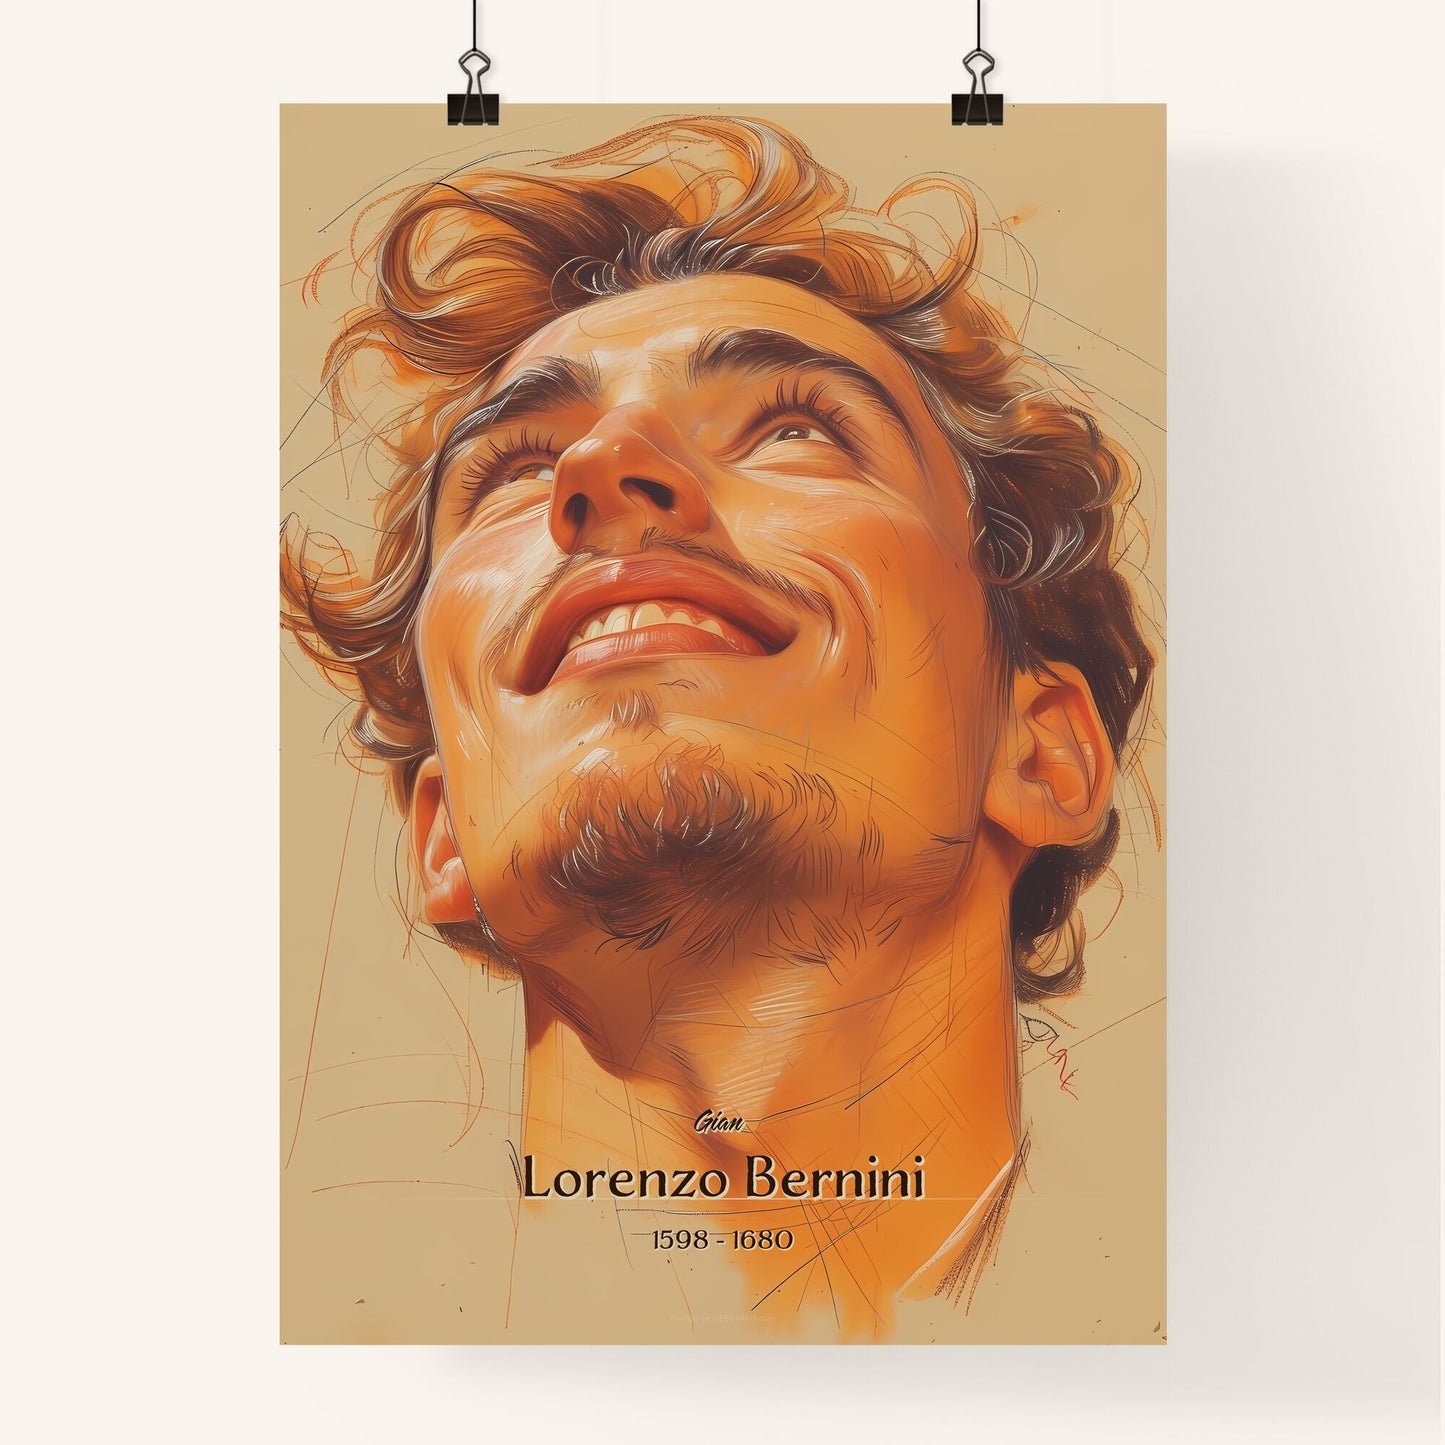 Gian, Lorenzo Bernini, 1598 - 1680, A Poster of a man looking up to the sky Default Title